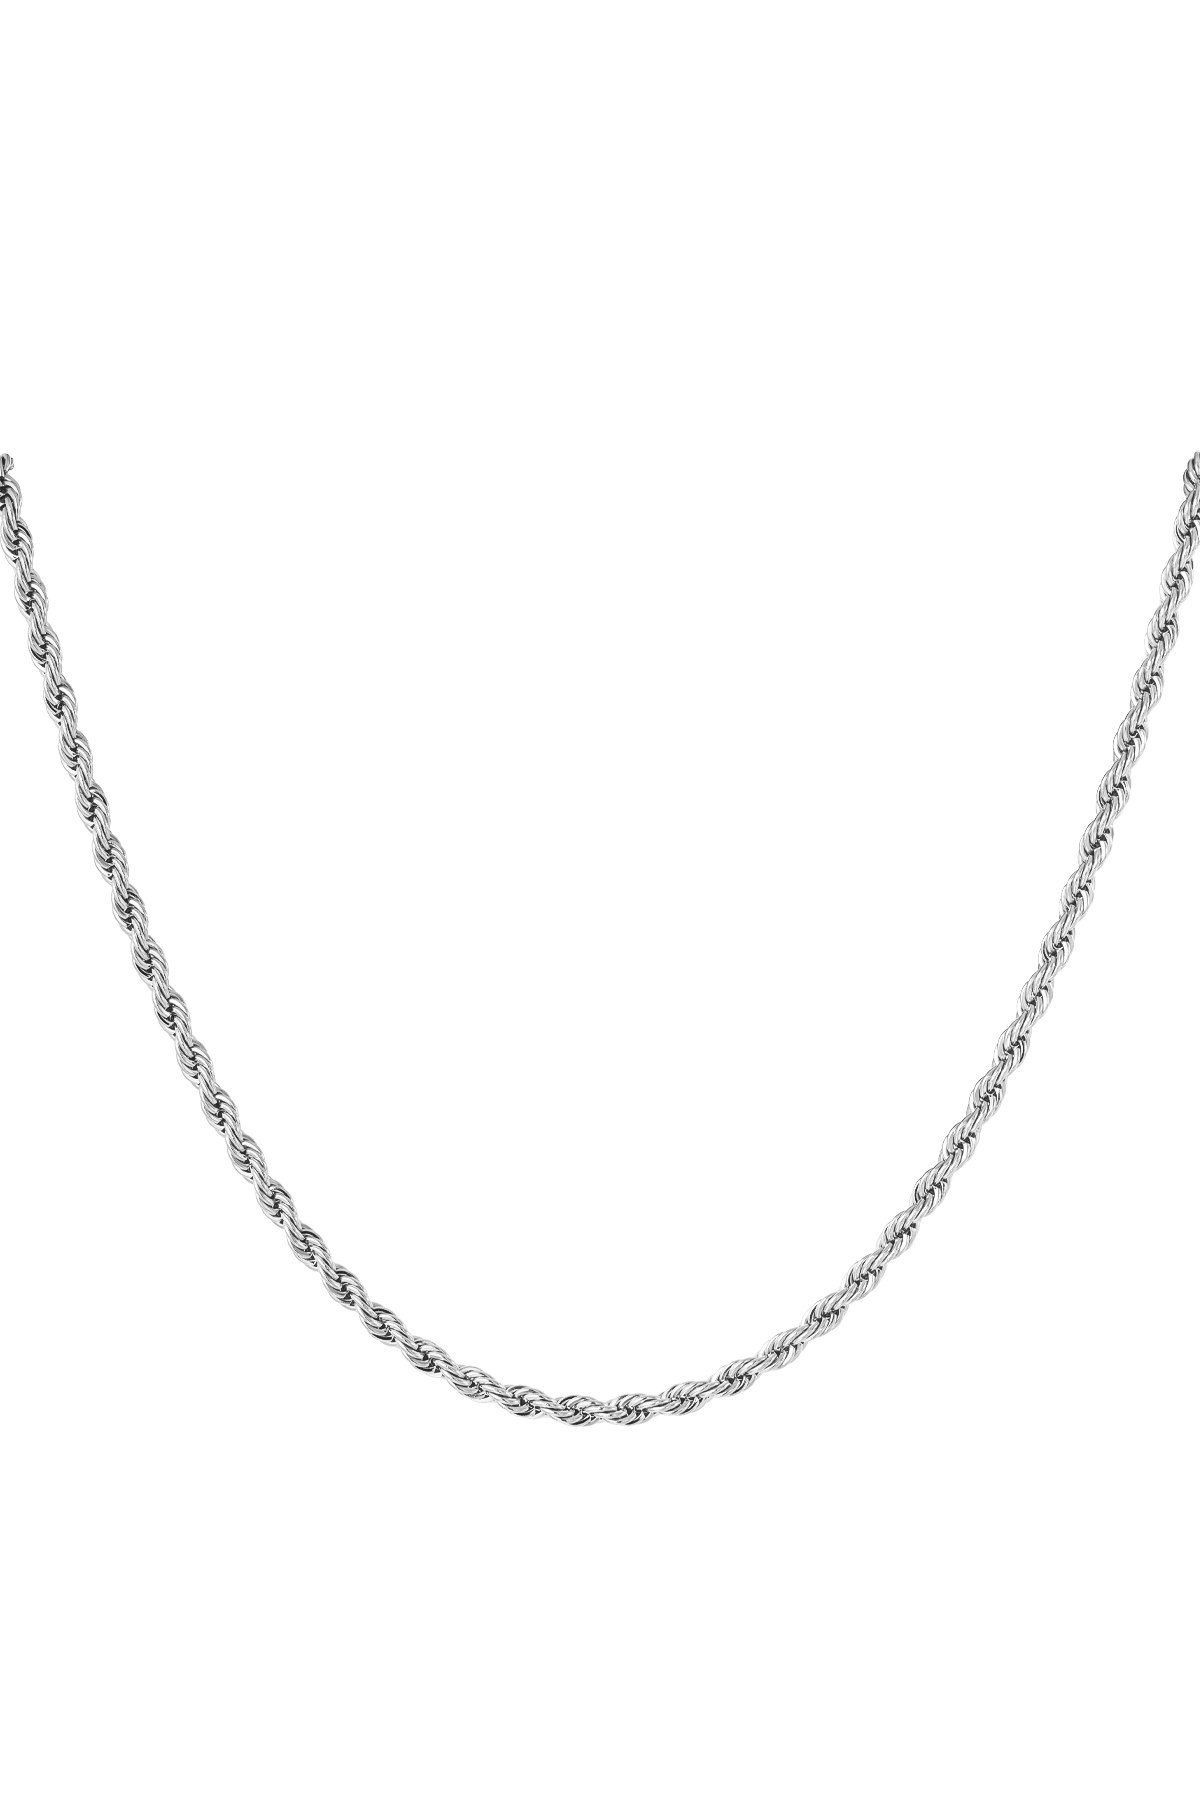 Unisex twisted chain long 60cm - silver-4.0MM